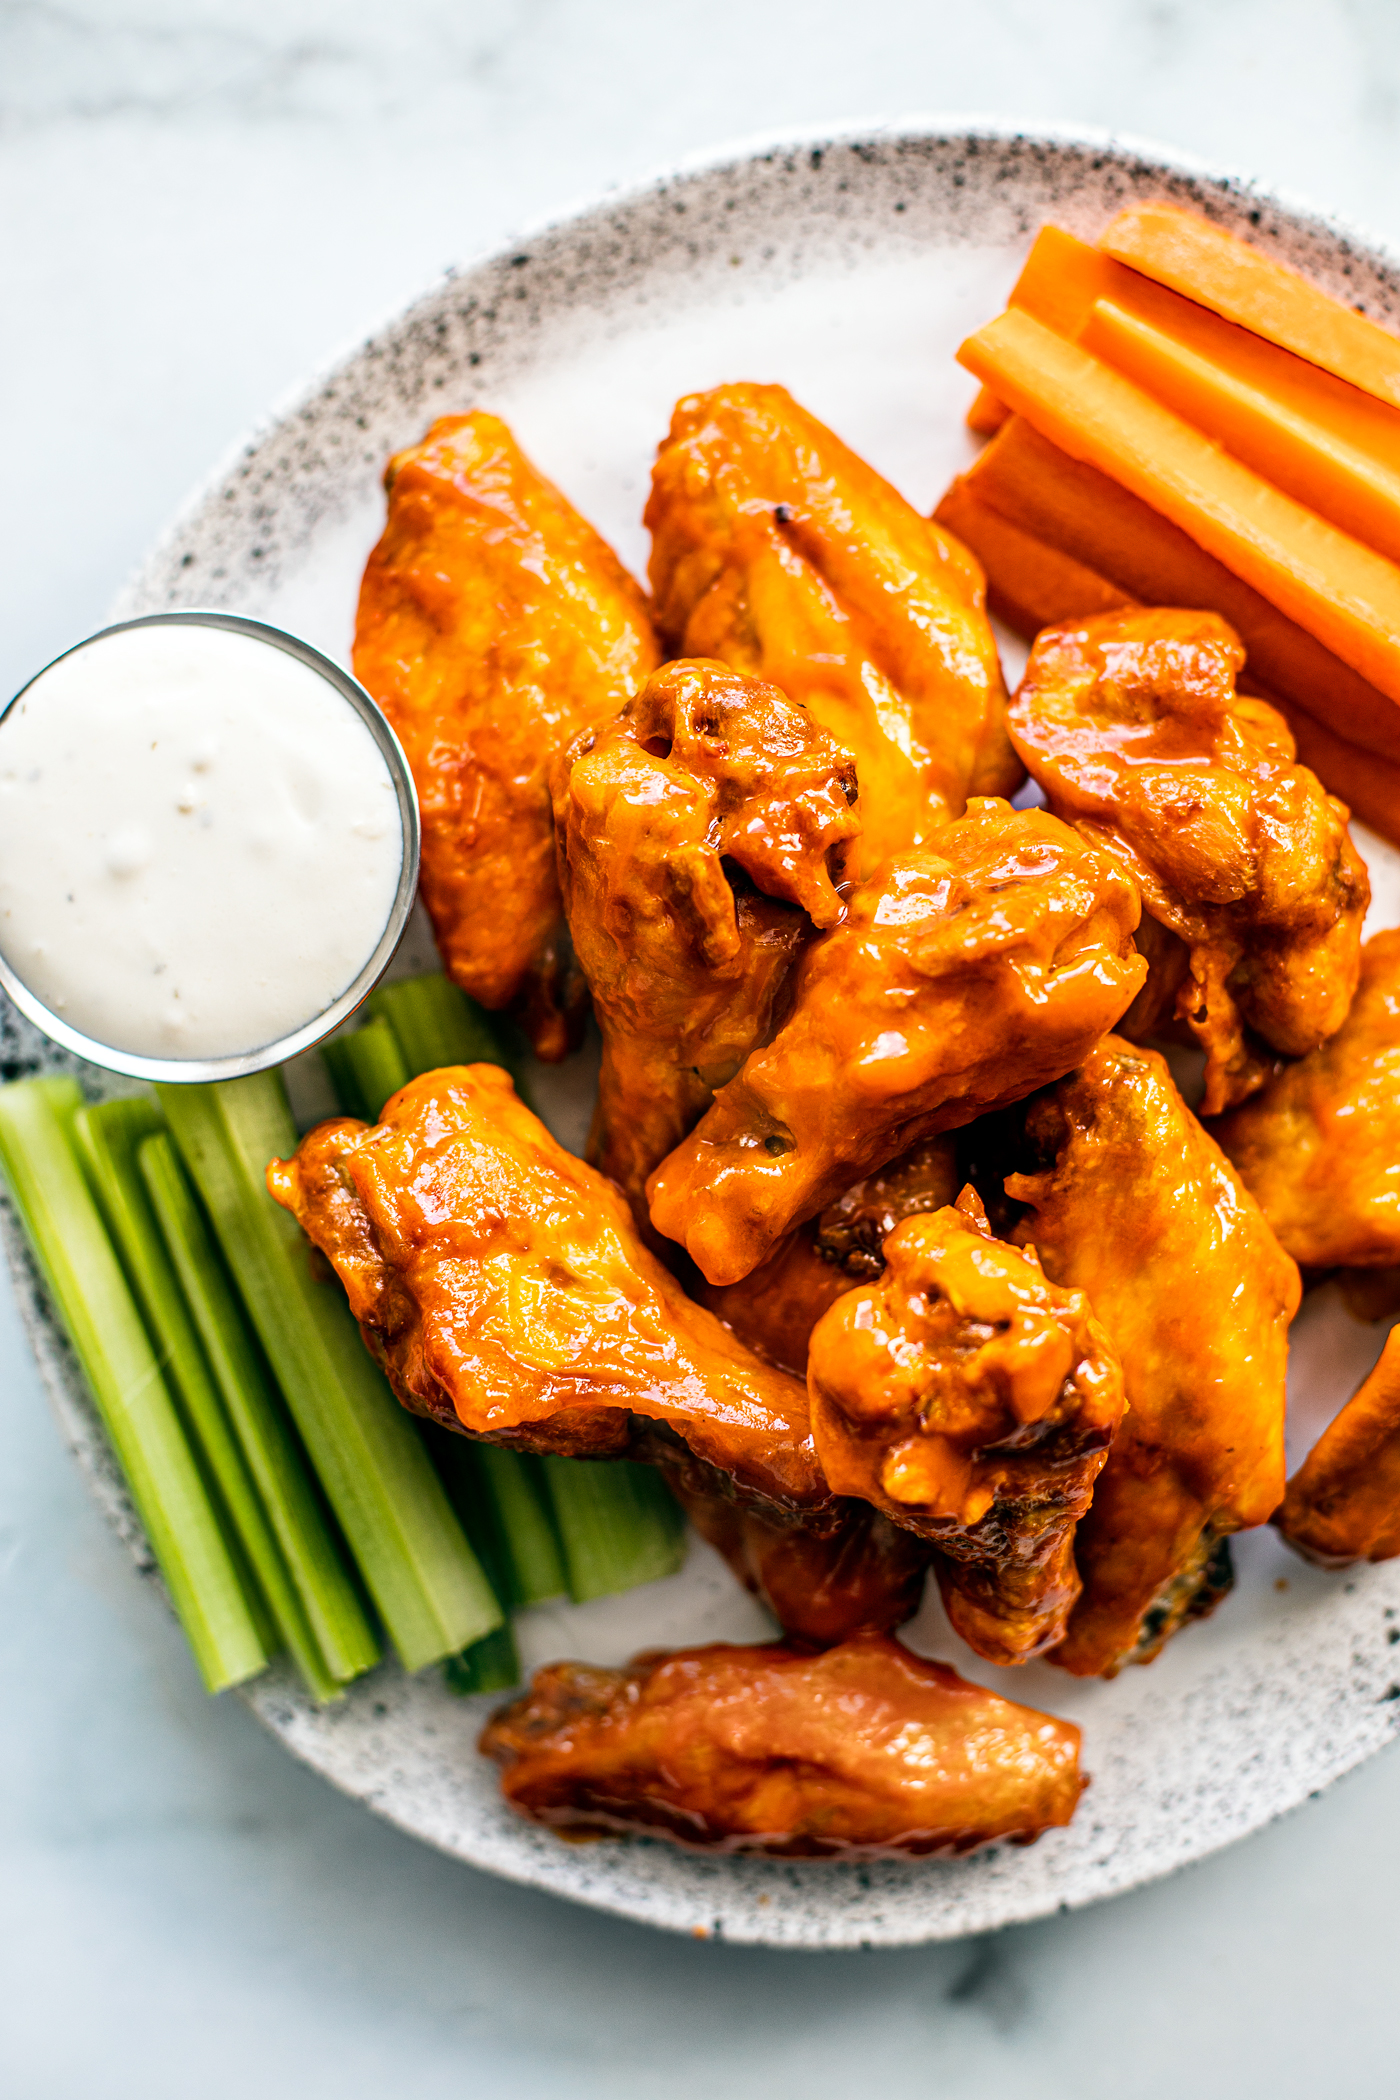  Serving plate of saucy buffalo wings with carrot and celery sticks, and blue cheese dip.